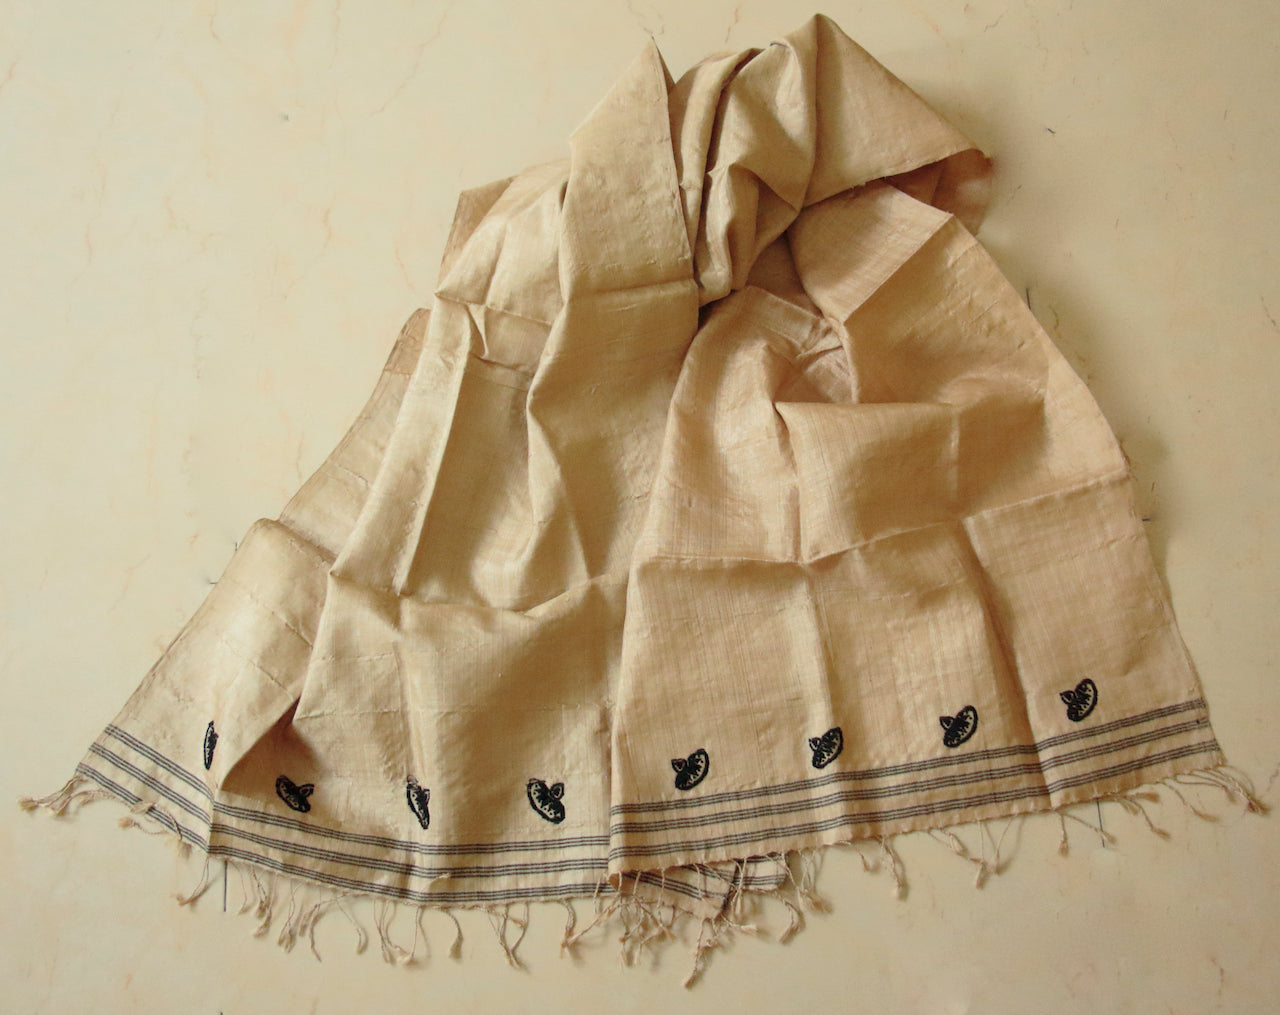 Golden Muga Silk Scarf / Stole with traditional motifs / handwoven from Assam